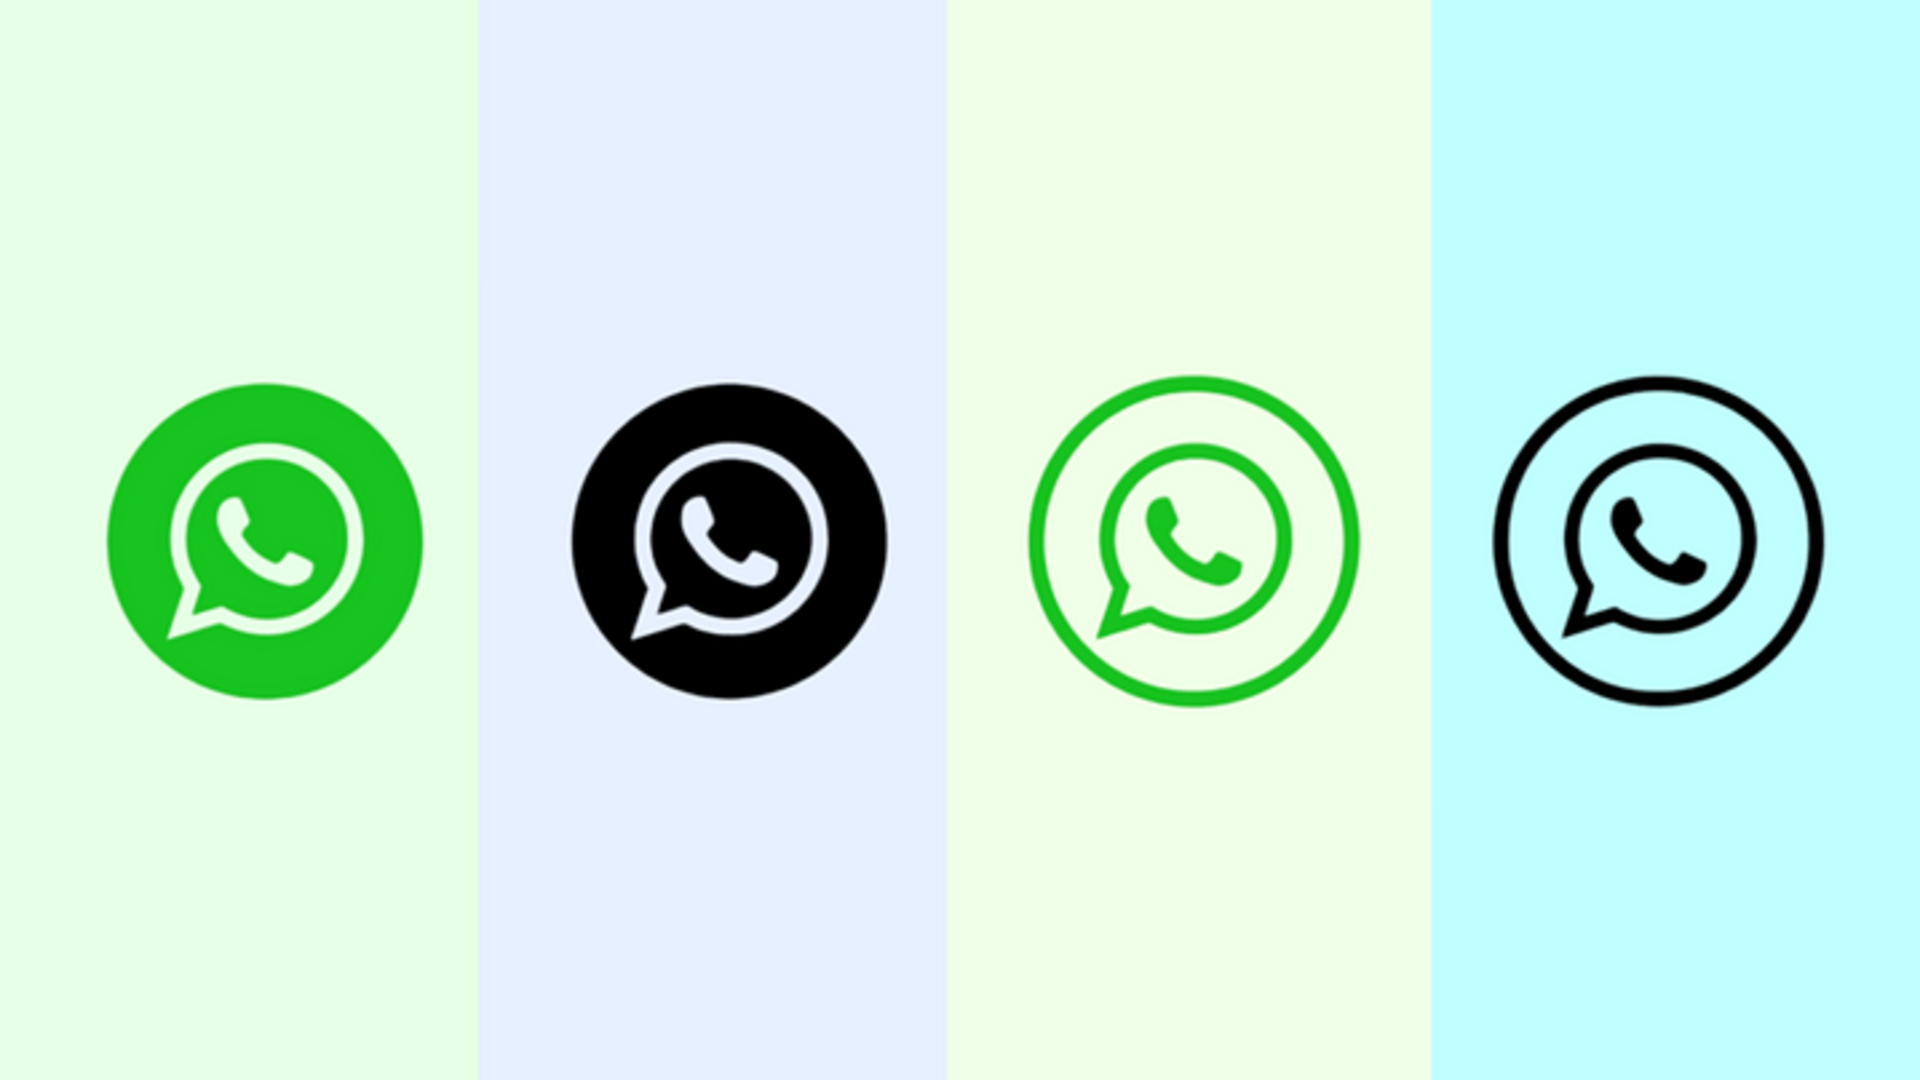 iPhone users can now create stickers on WhatsApp: Here's how